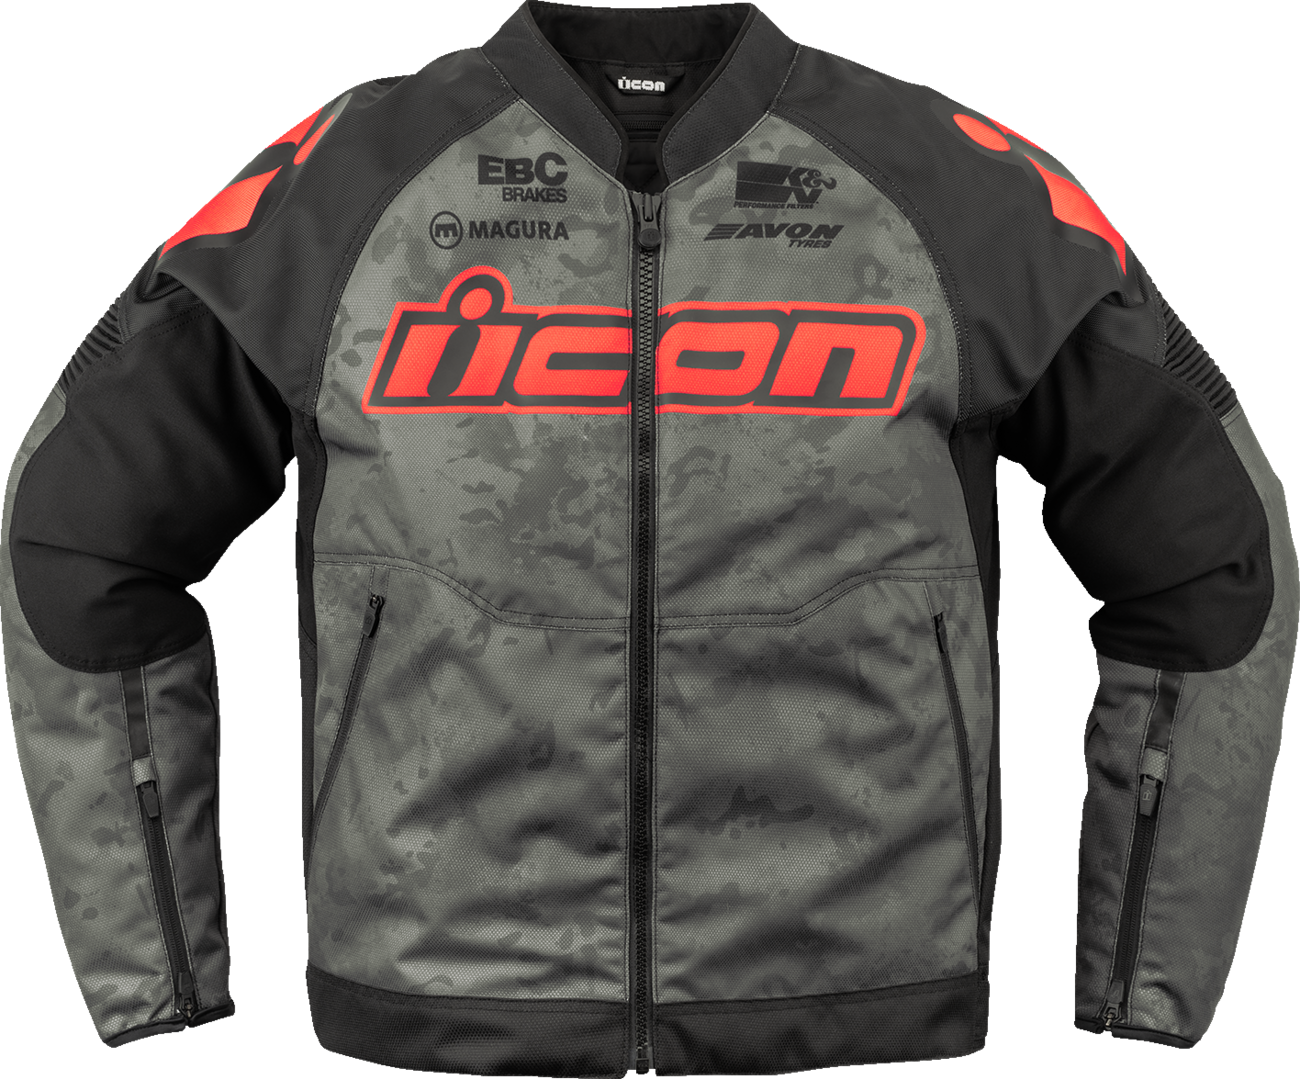 ICON Overlord3™ CE Magnacross Jacket - Gray - Small 2820-6712